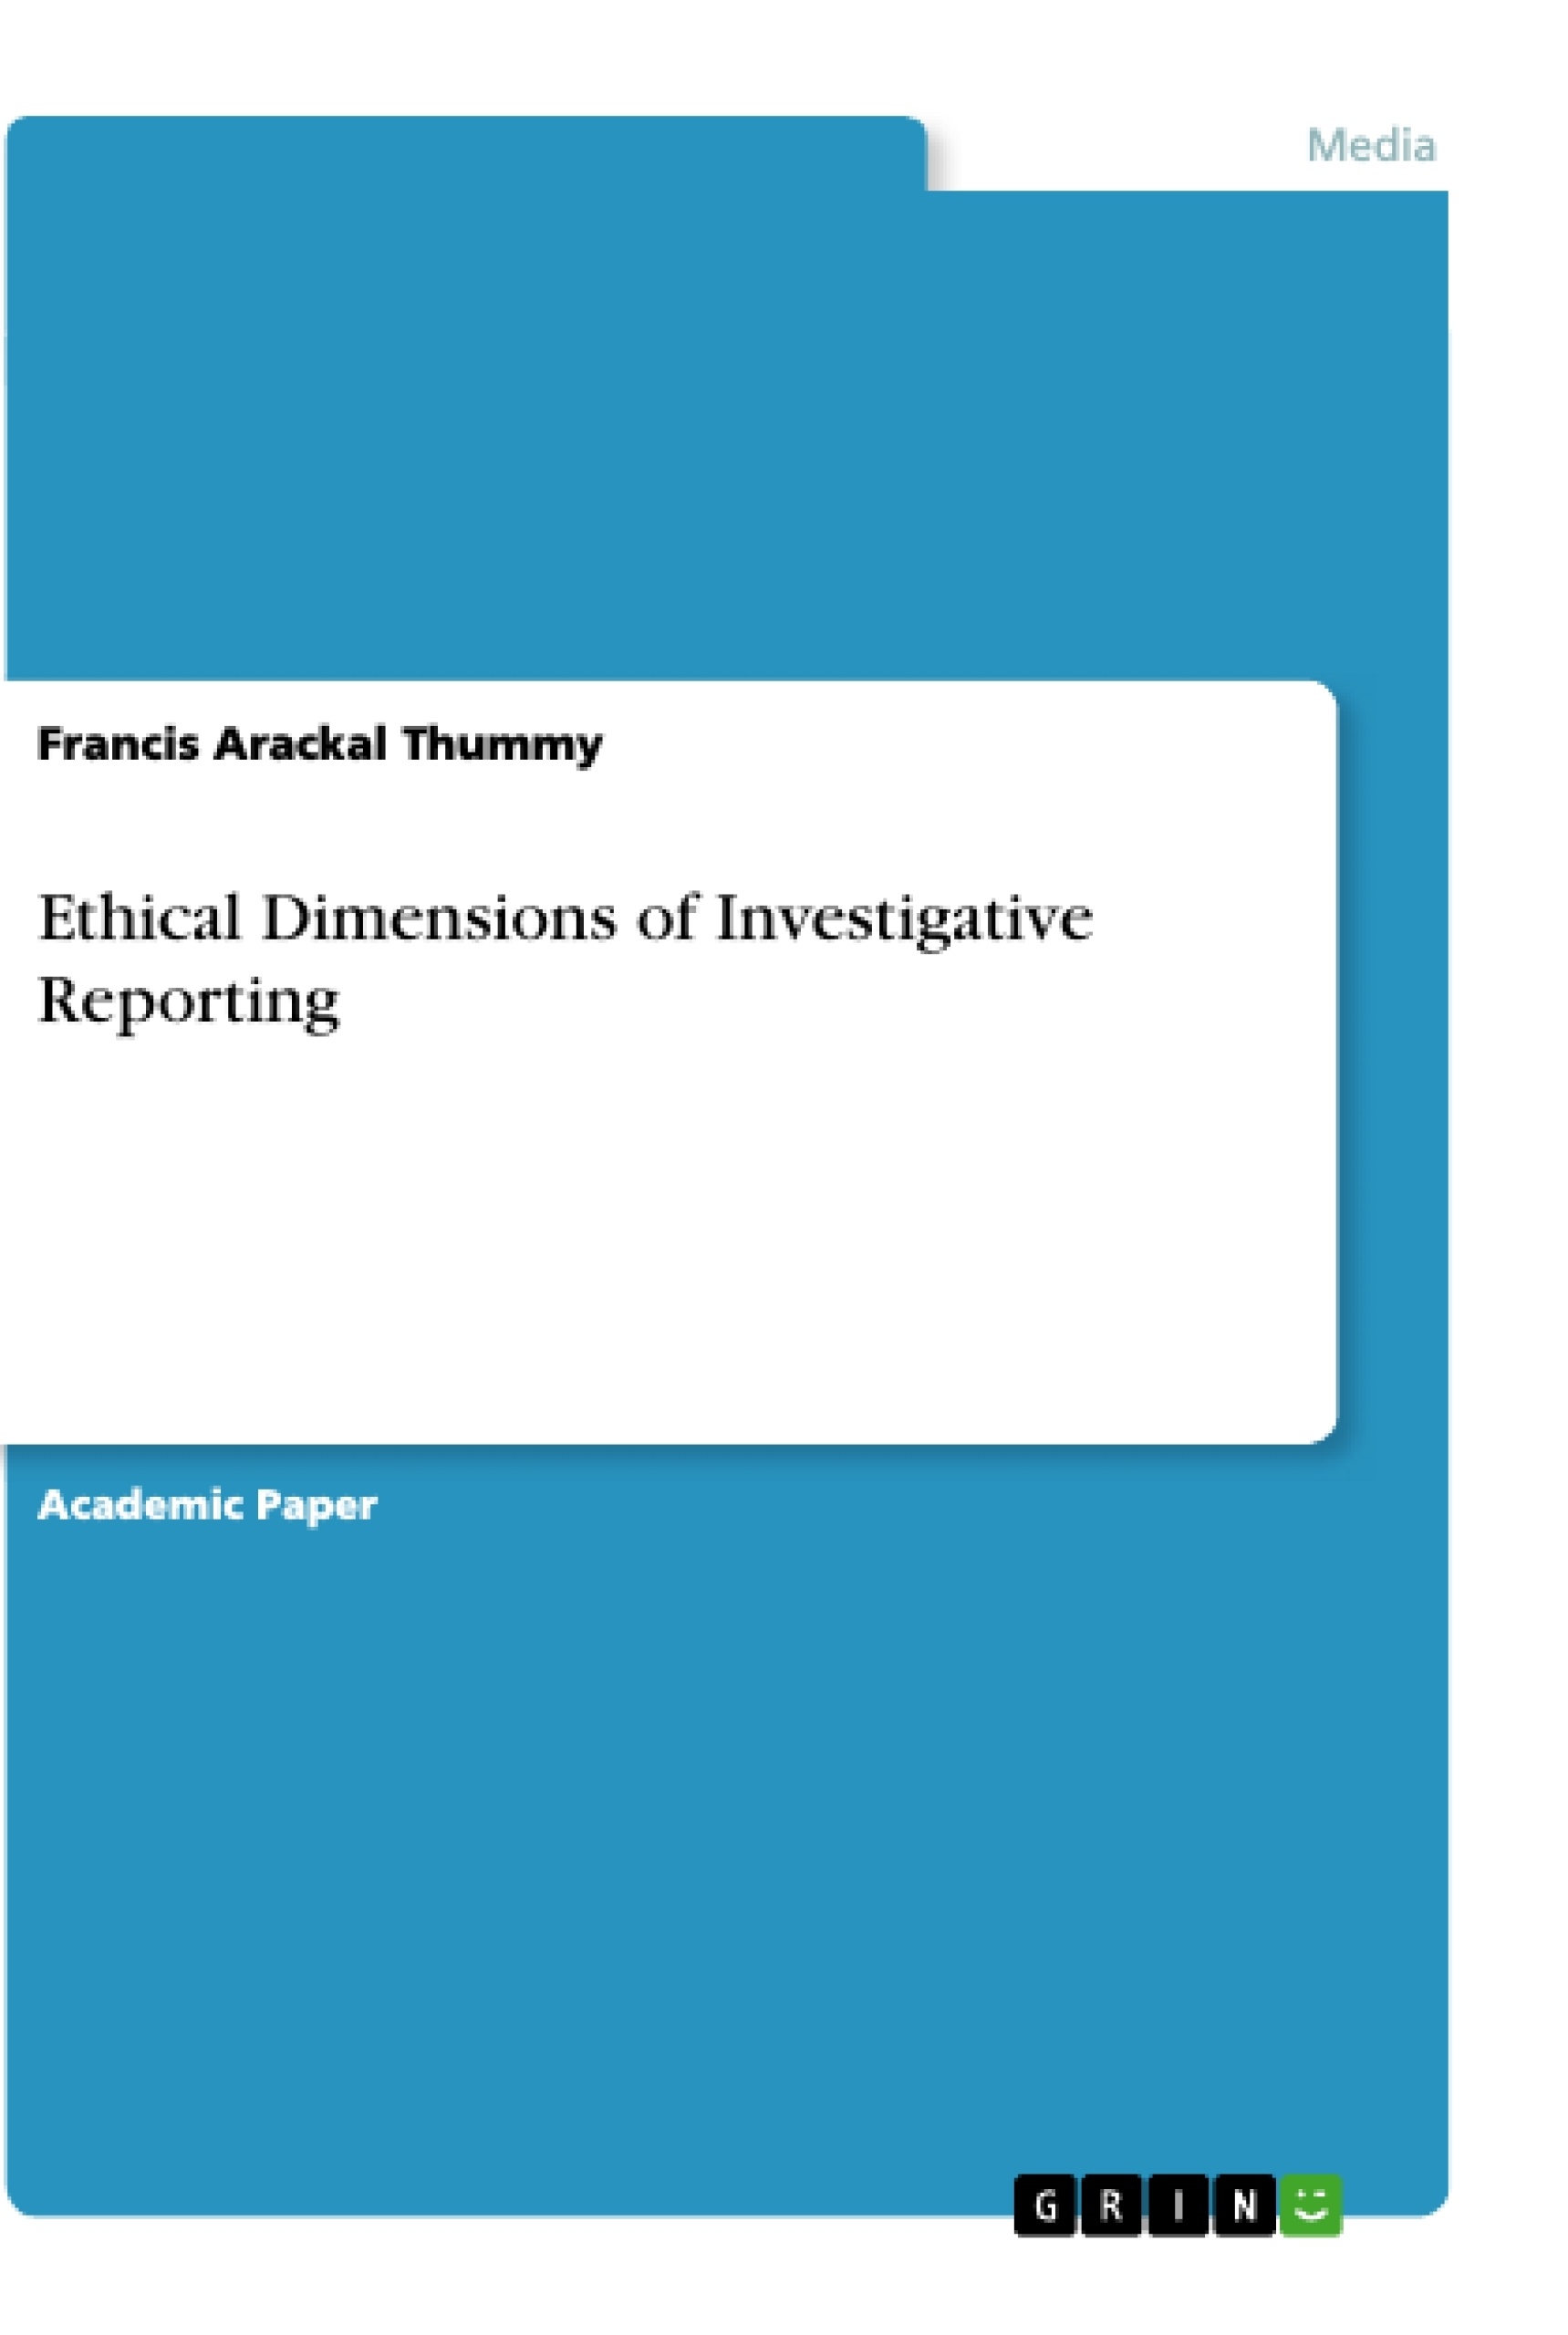 Título: Ethical Dimensions of Investigative Reporting